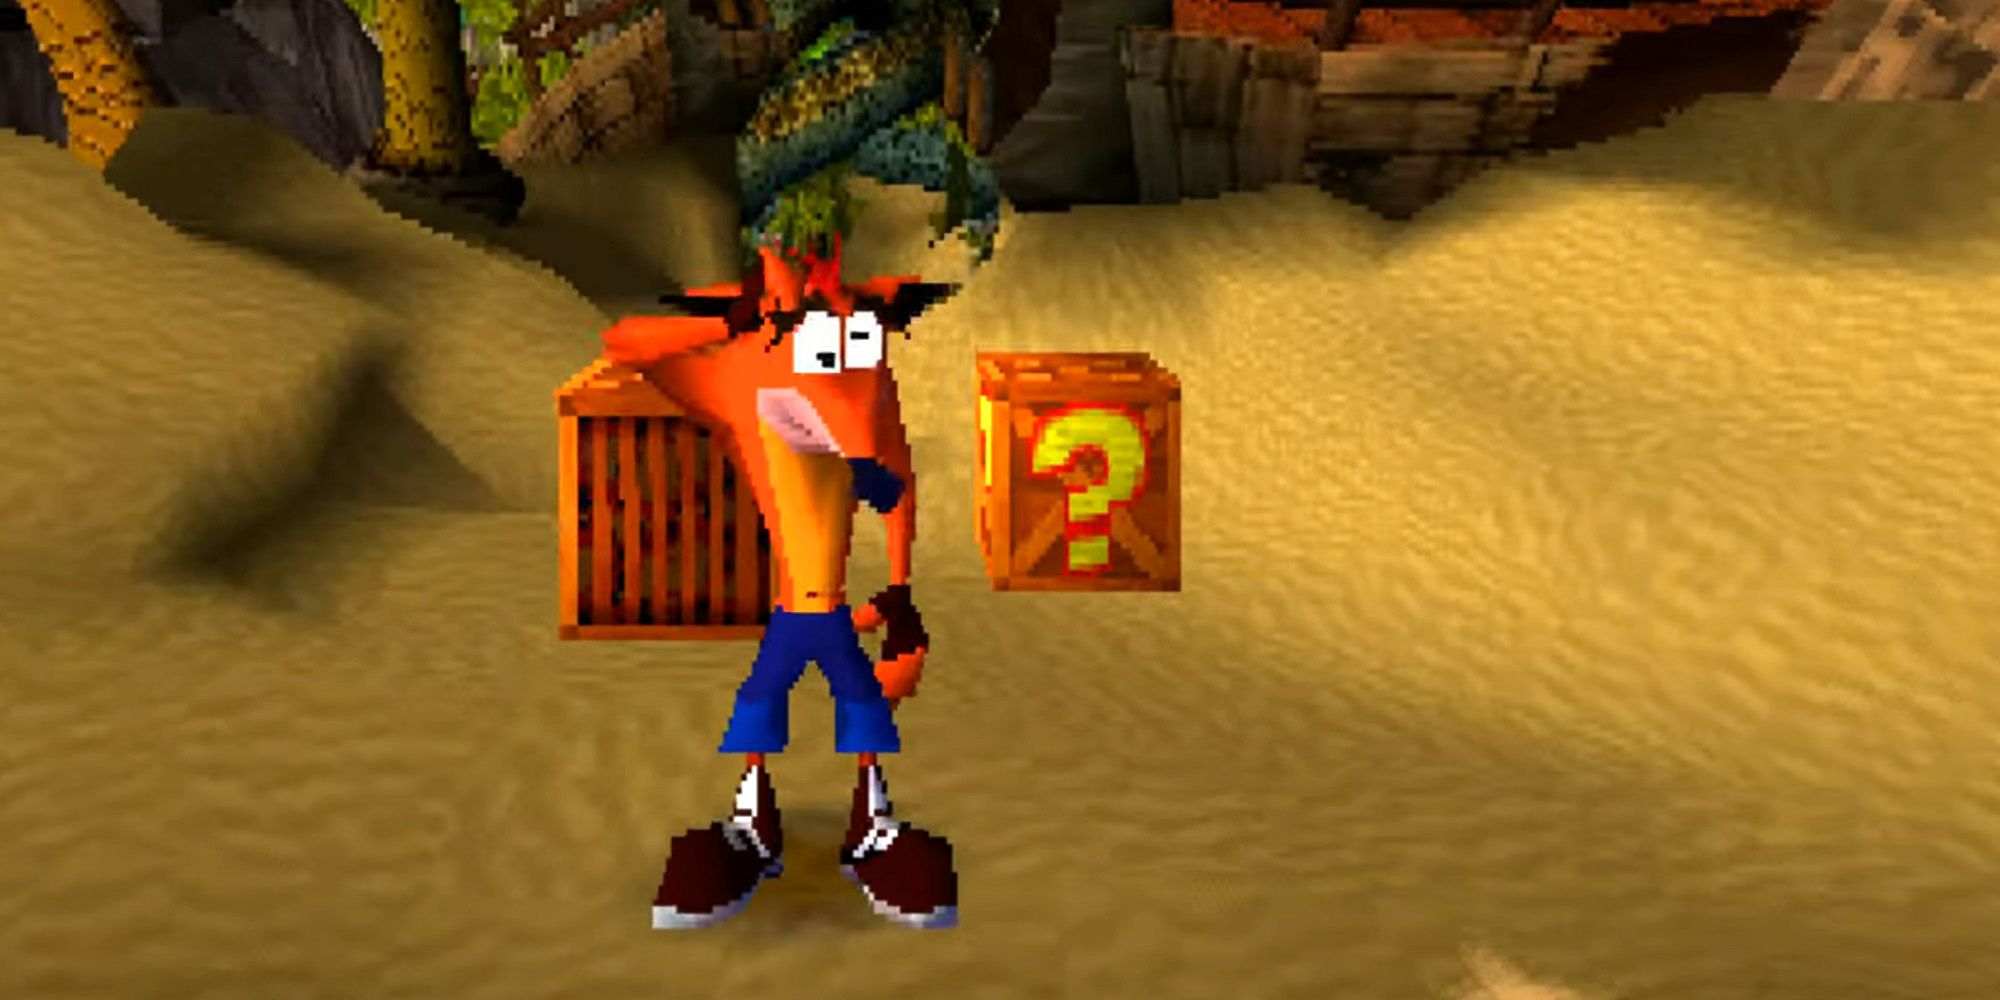 Crash Bandicoot N. Sane Trilogy' On PS4 Is Missing Only One Thing